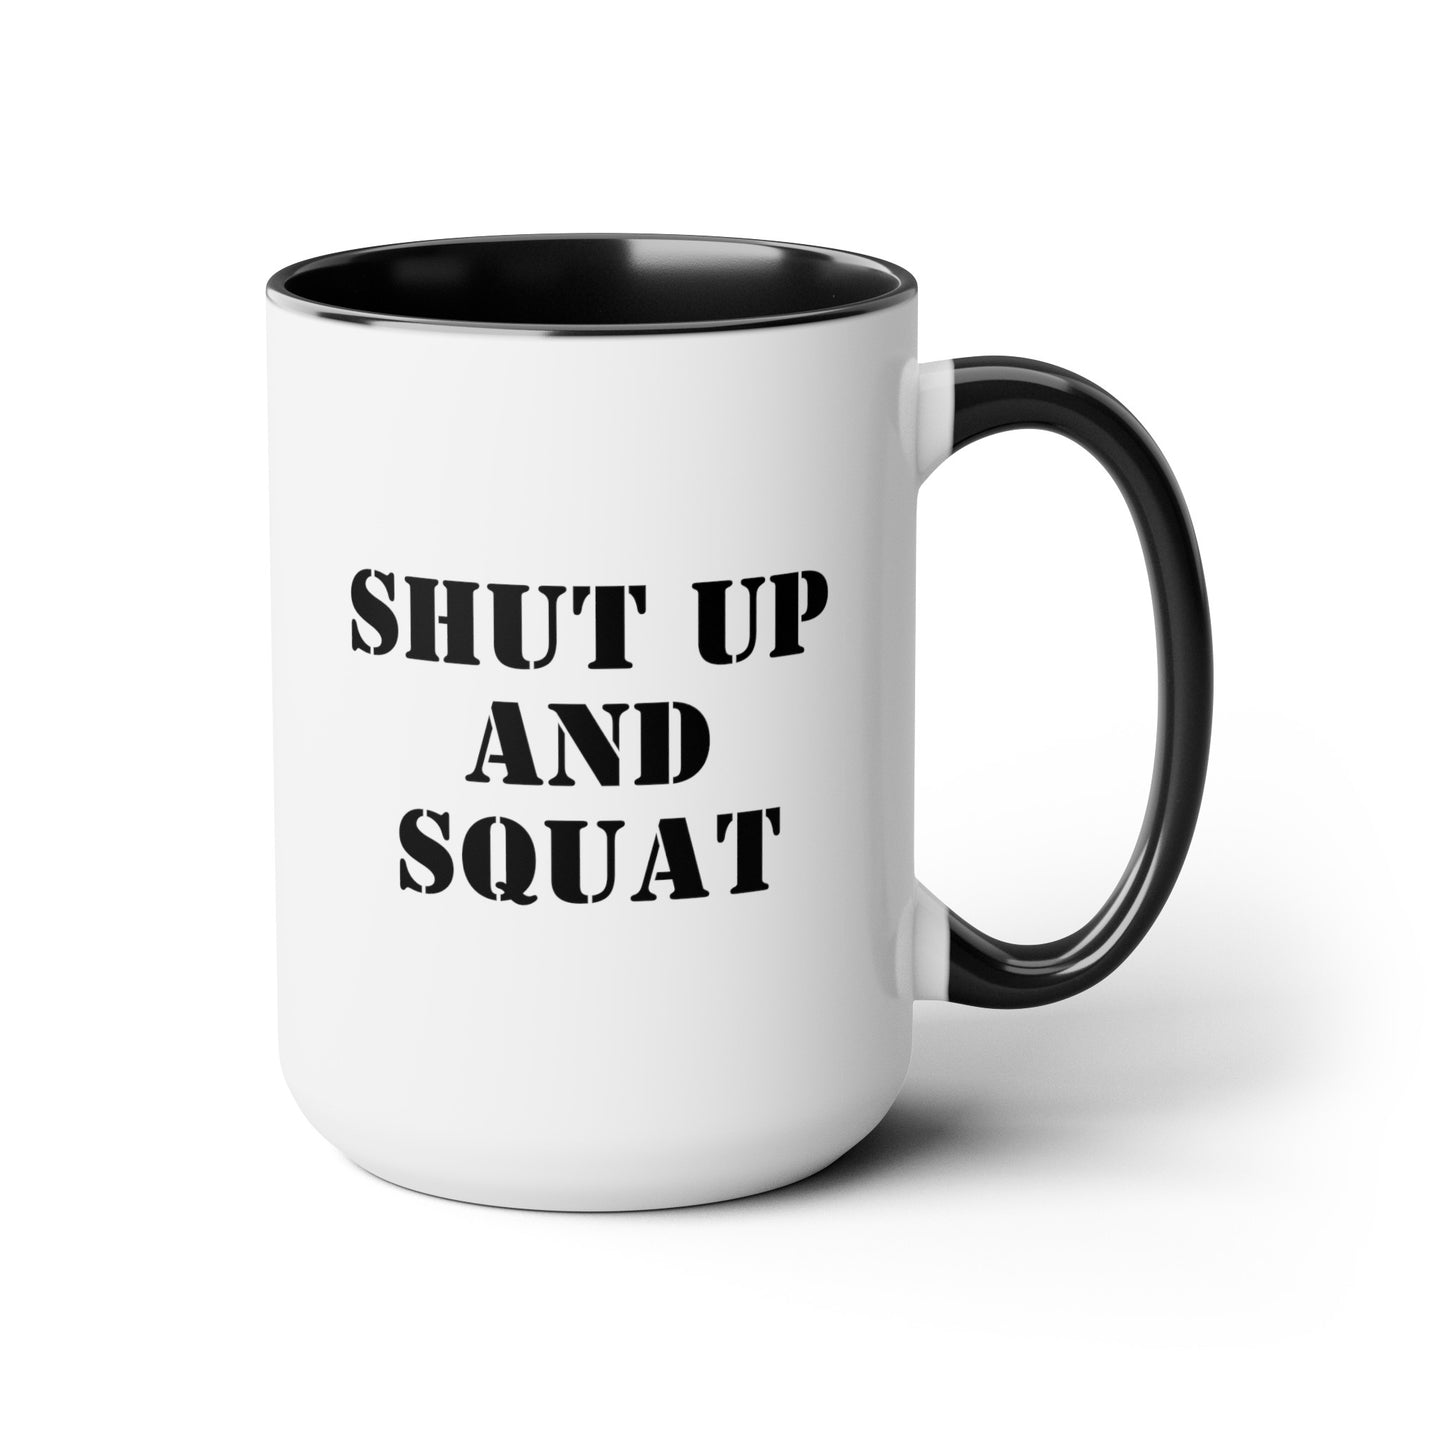 Shut Up And Squat 15oz white with black accent funny large coffee mug gift for gym rat weightlifting friend powerlifting bodybuilding work out fitness lover girl  waveywares wavey wares wavywares wavy wares